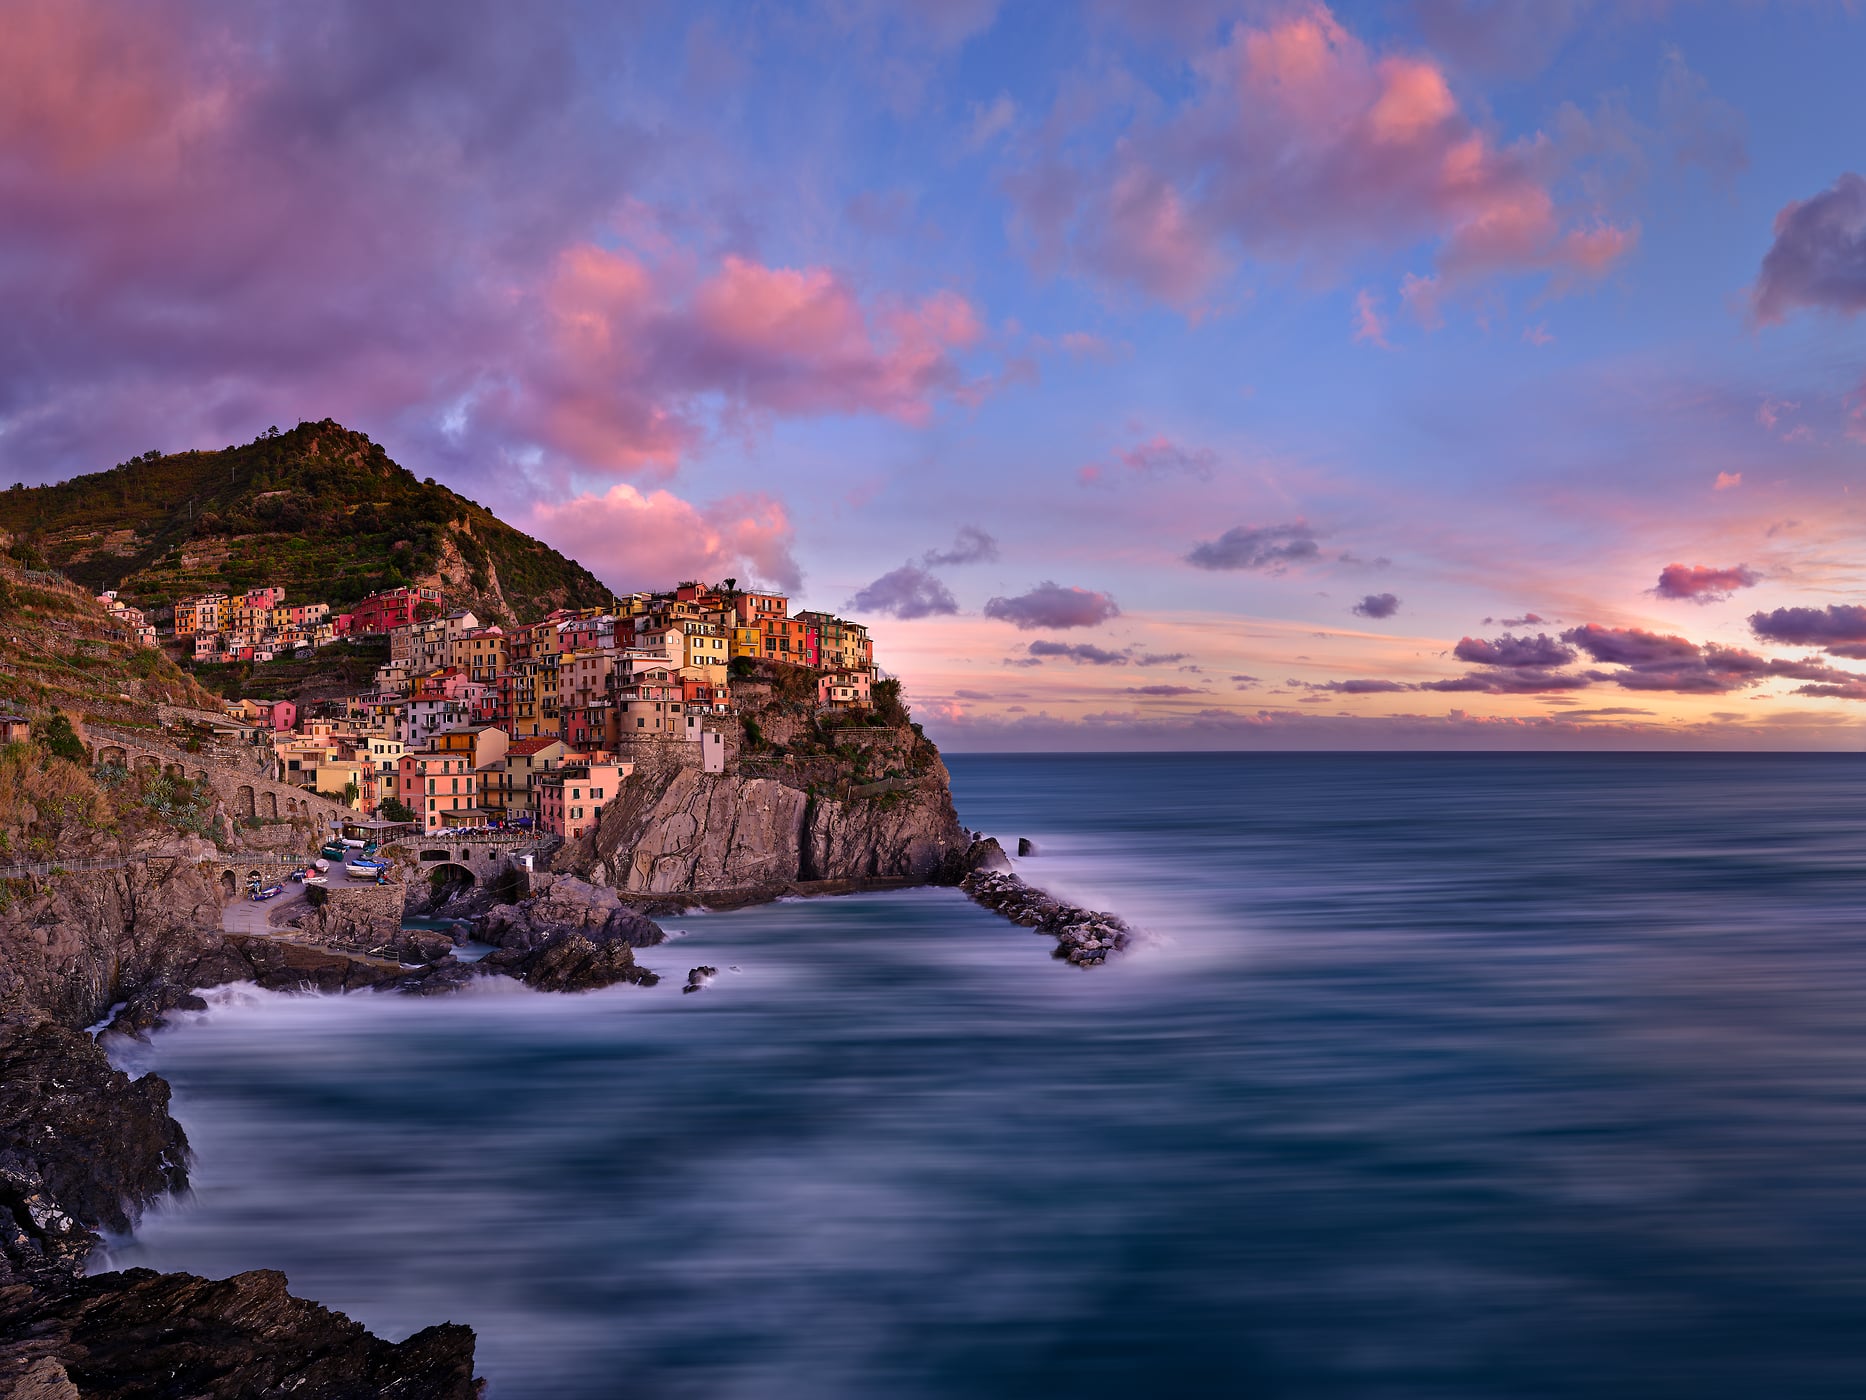 685 megapixels! A very high resolution, large-format VAST photo print of the Mediterranean coastline at sunset with houses on rocky cliffs; photograph created by David Meaux in Manarola, Cinque Terre, Liguria, Italy.